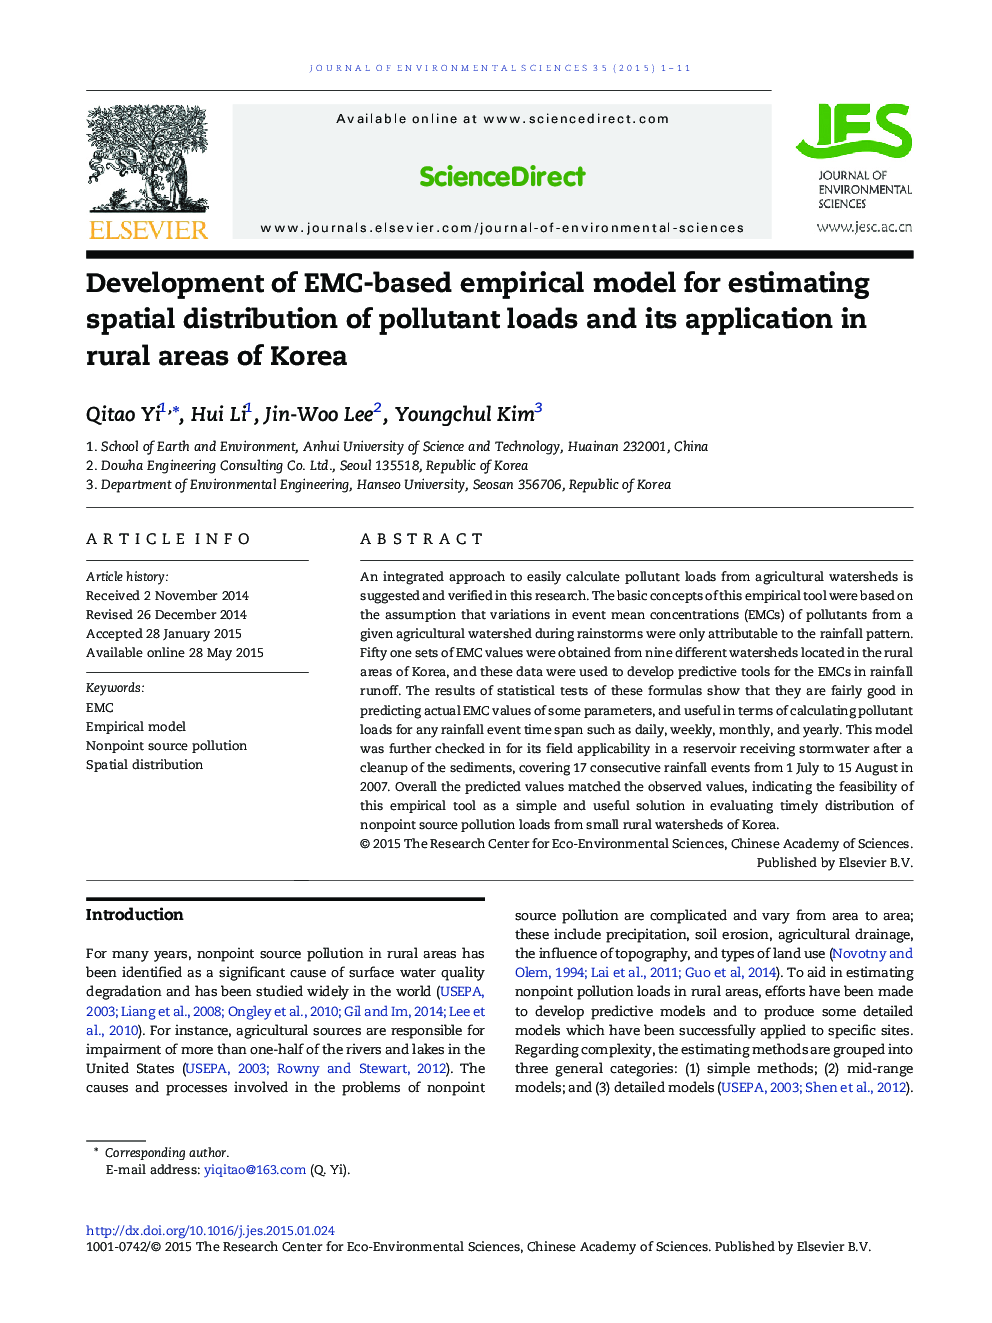 Development of EMC-based empirical model for estimating spatial distribution of pollutant loads and its application in rural areas of Korea